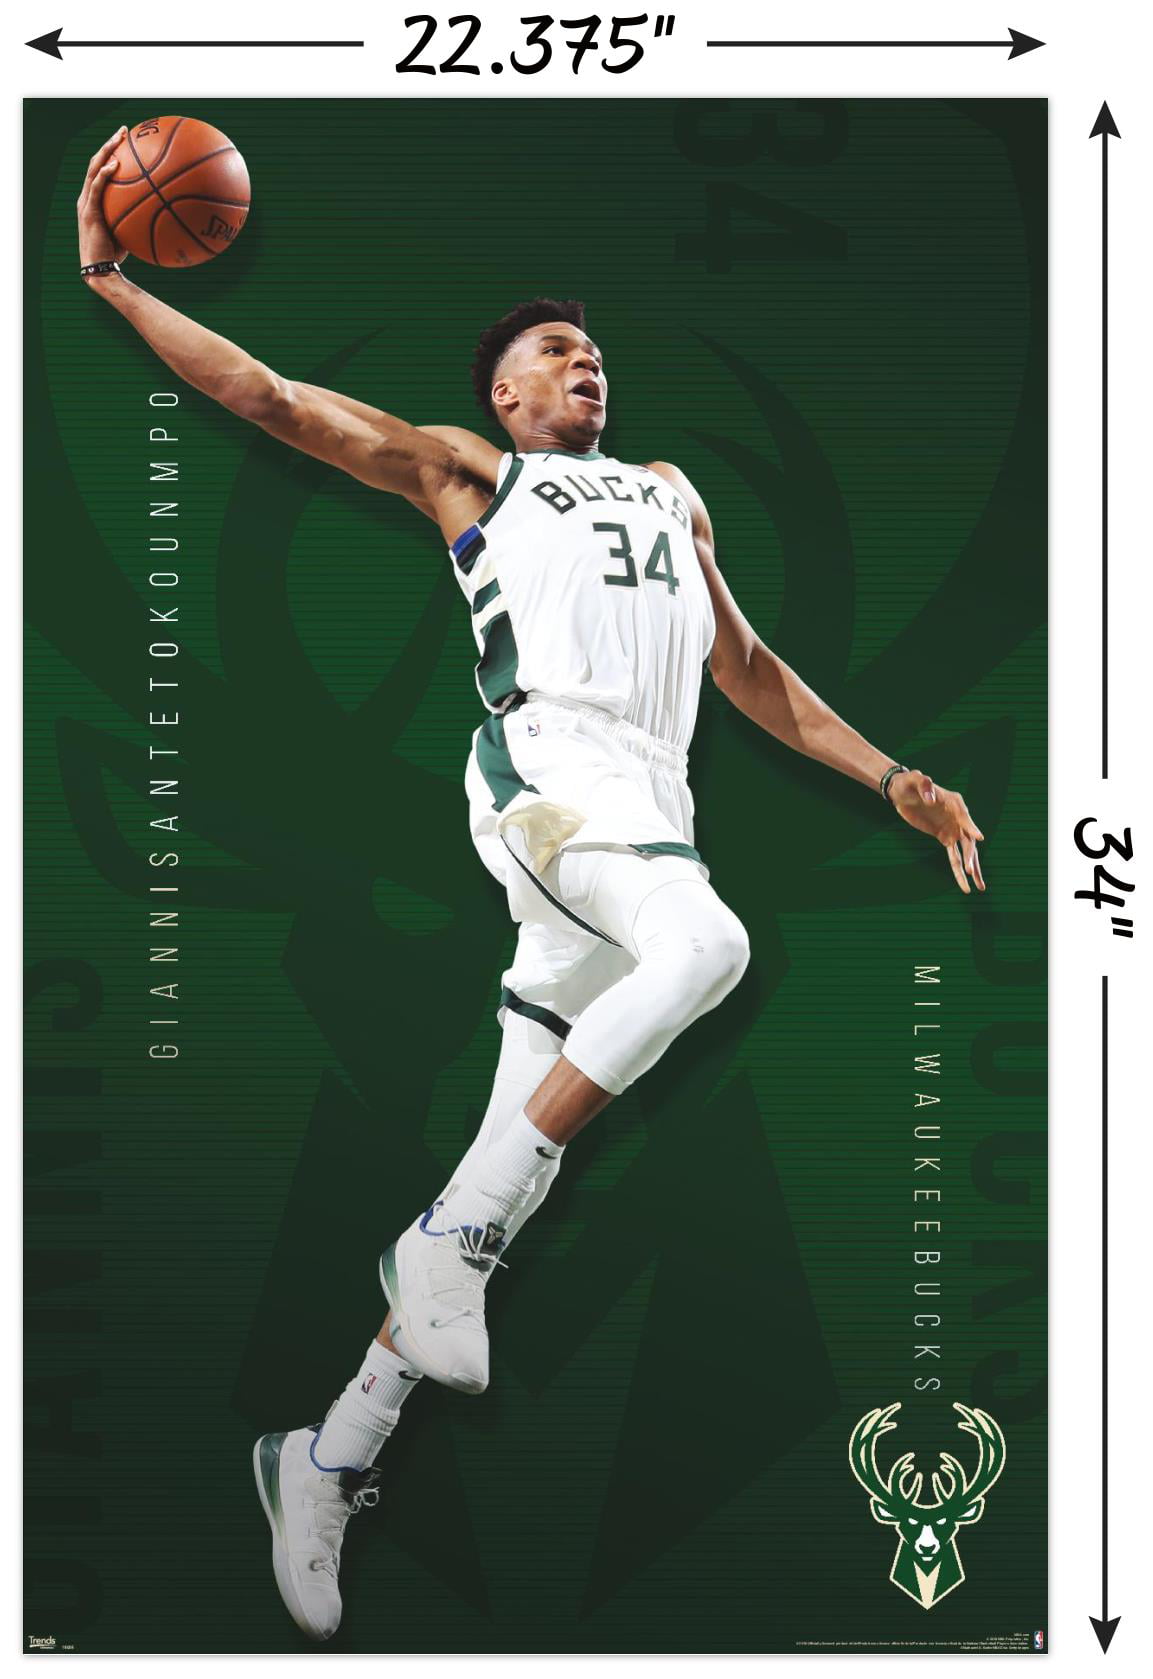 Shop Giannis Antetokounmpo Milwaukee Bucks Autographed NBA Champions  Limited Edition Exclusive Framed Collage